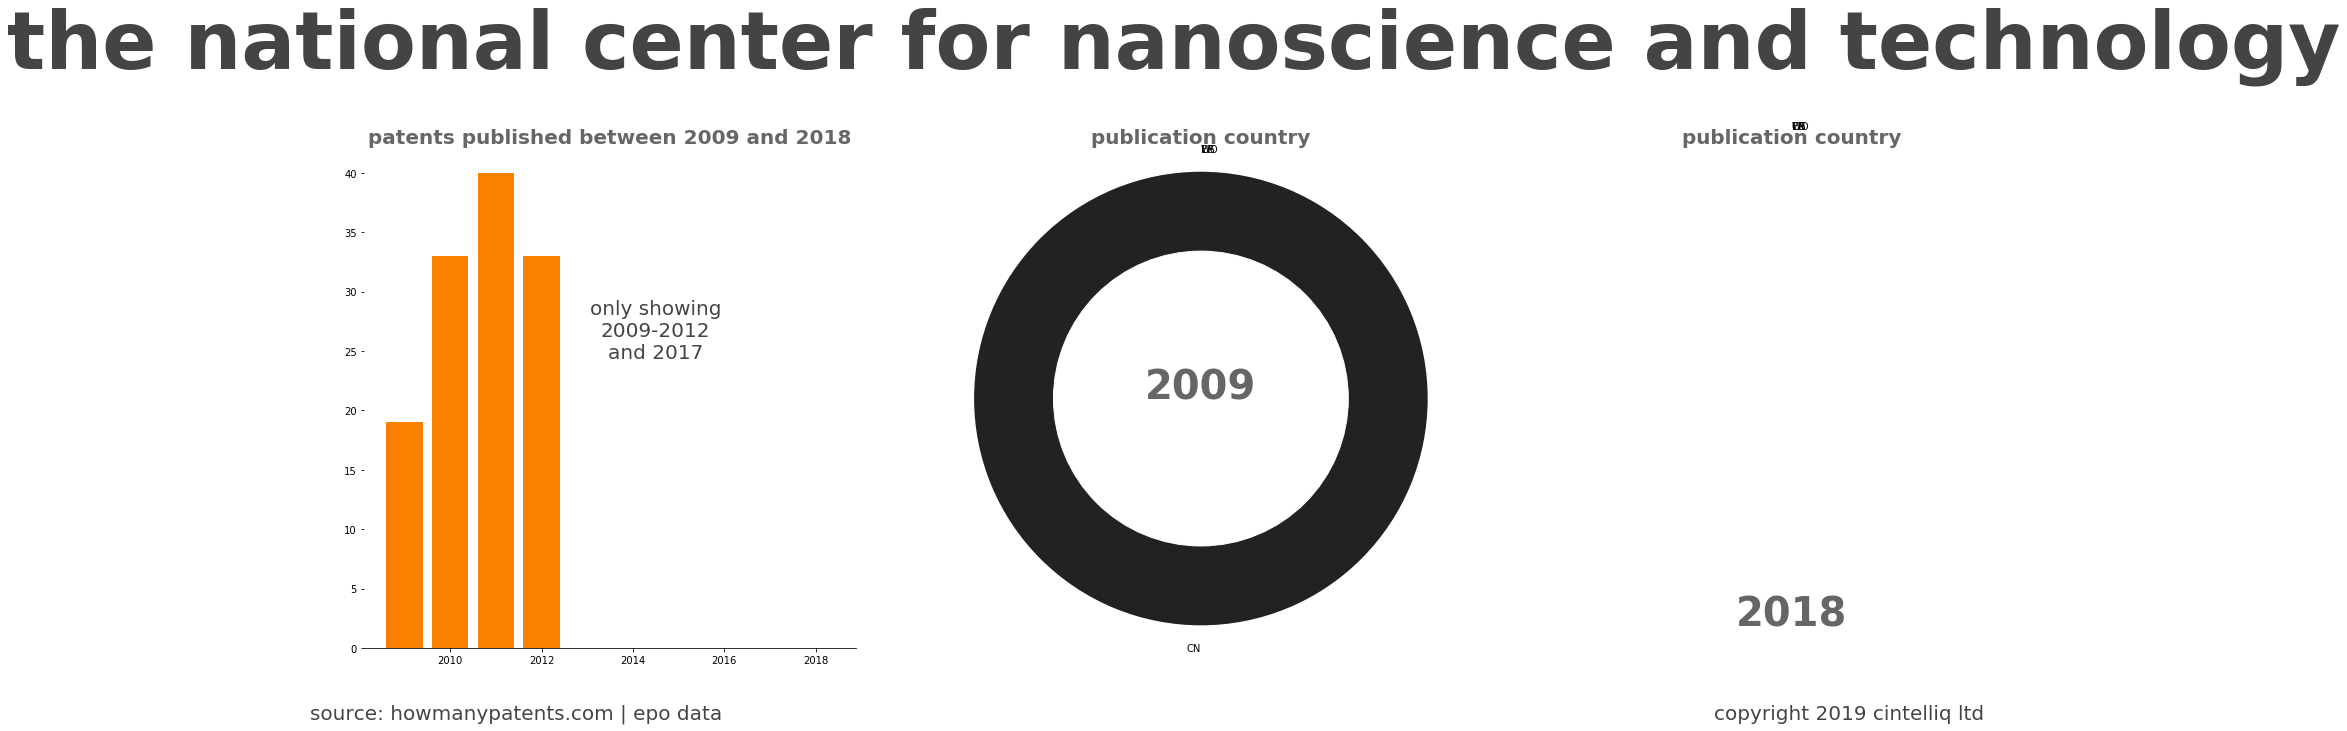 summary of patents for The National Center For Nanoscience And Technology